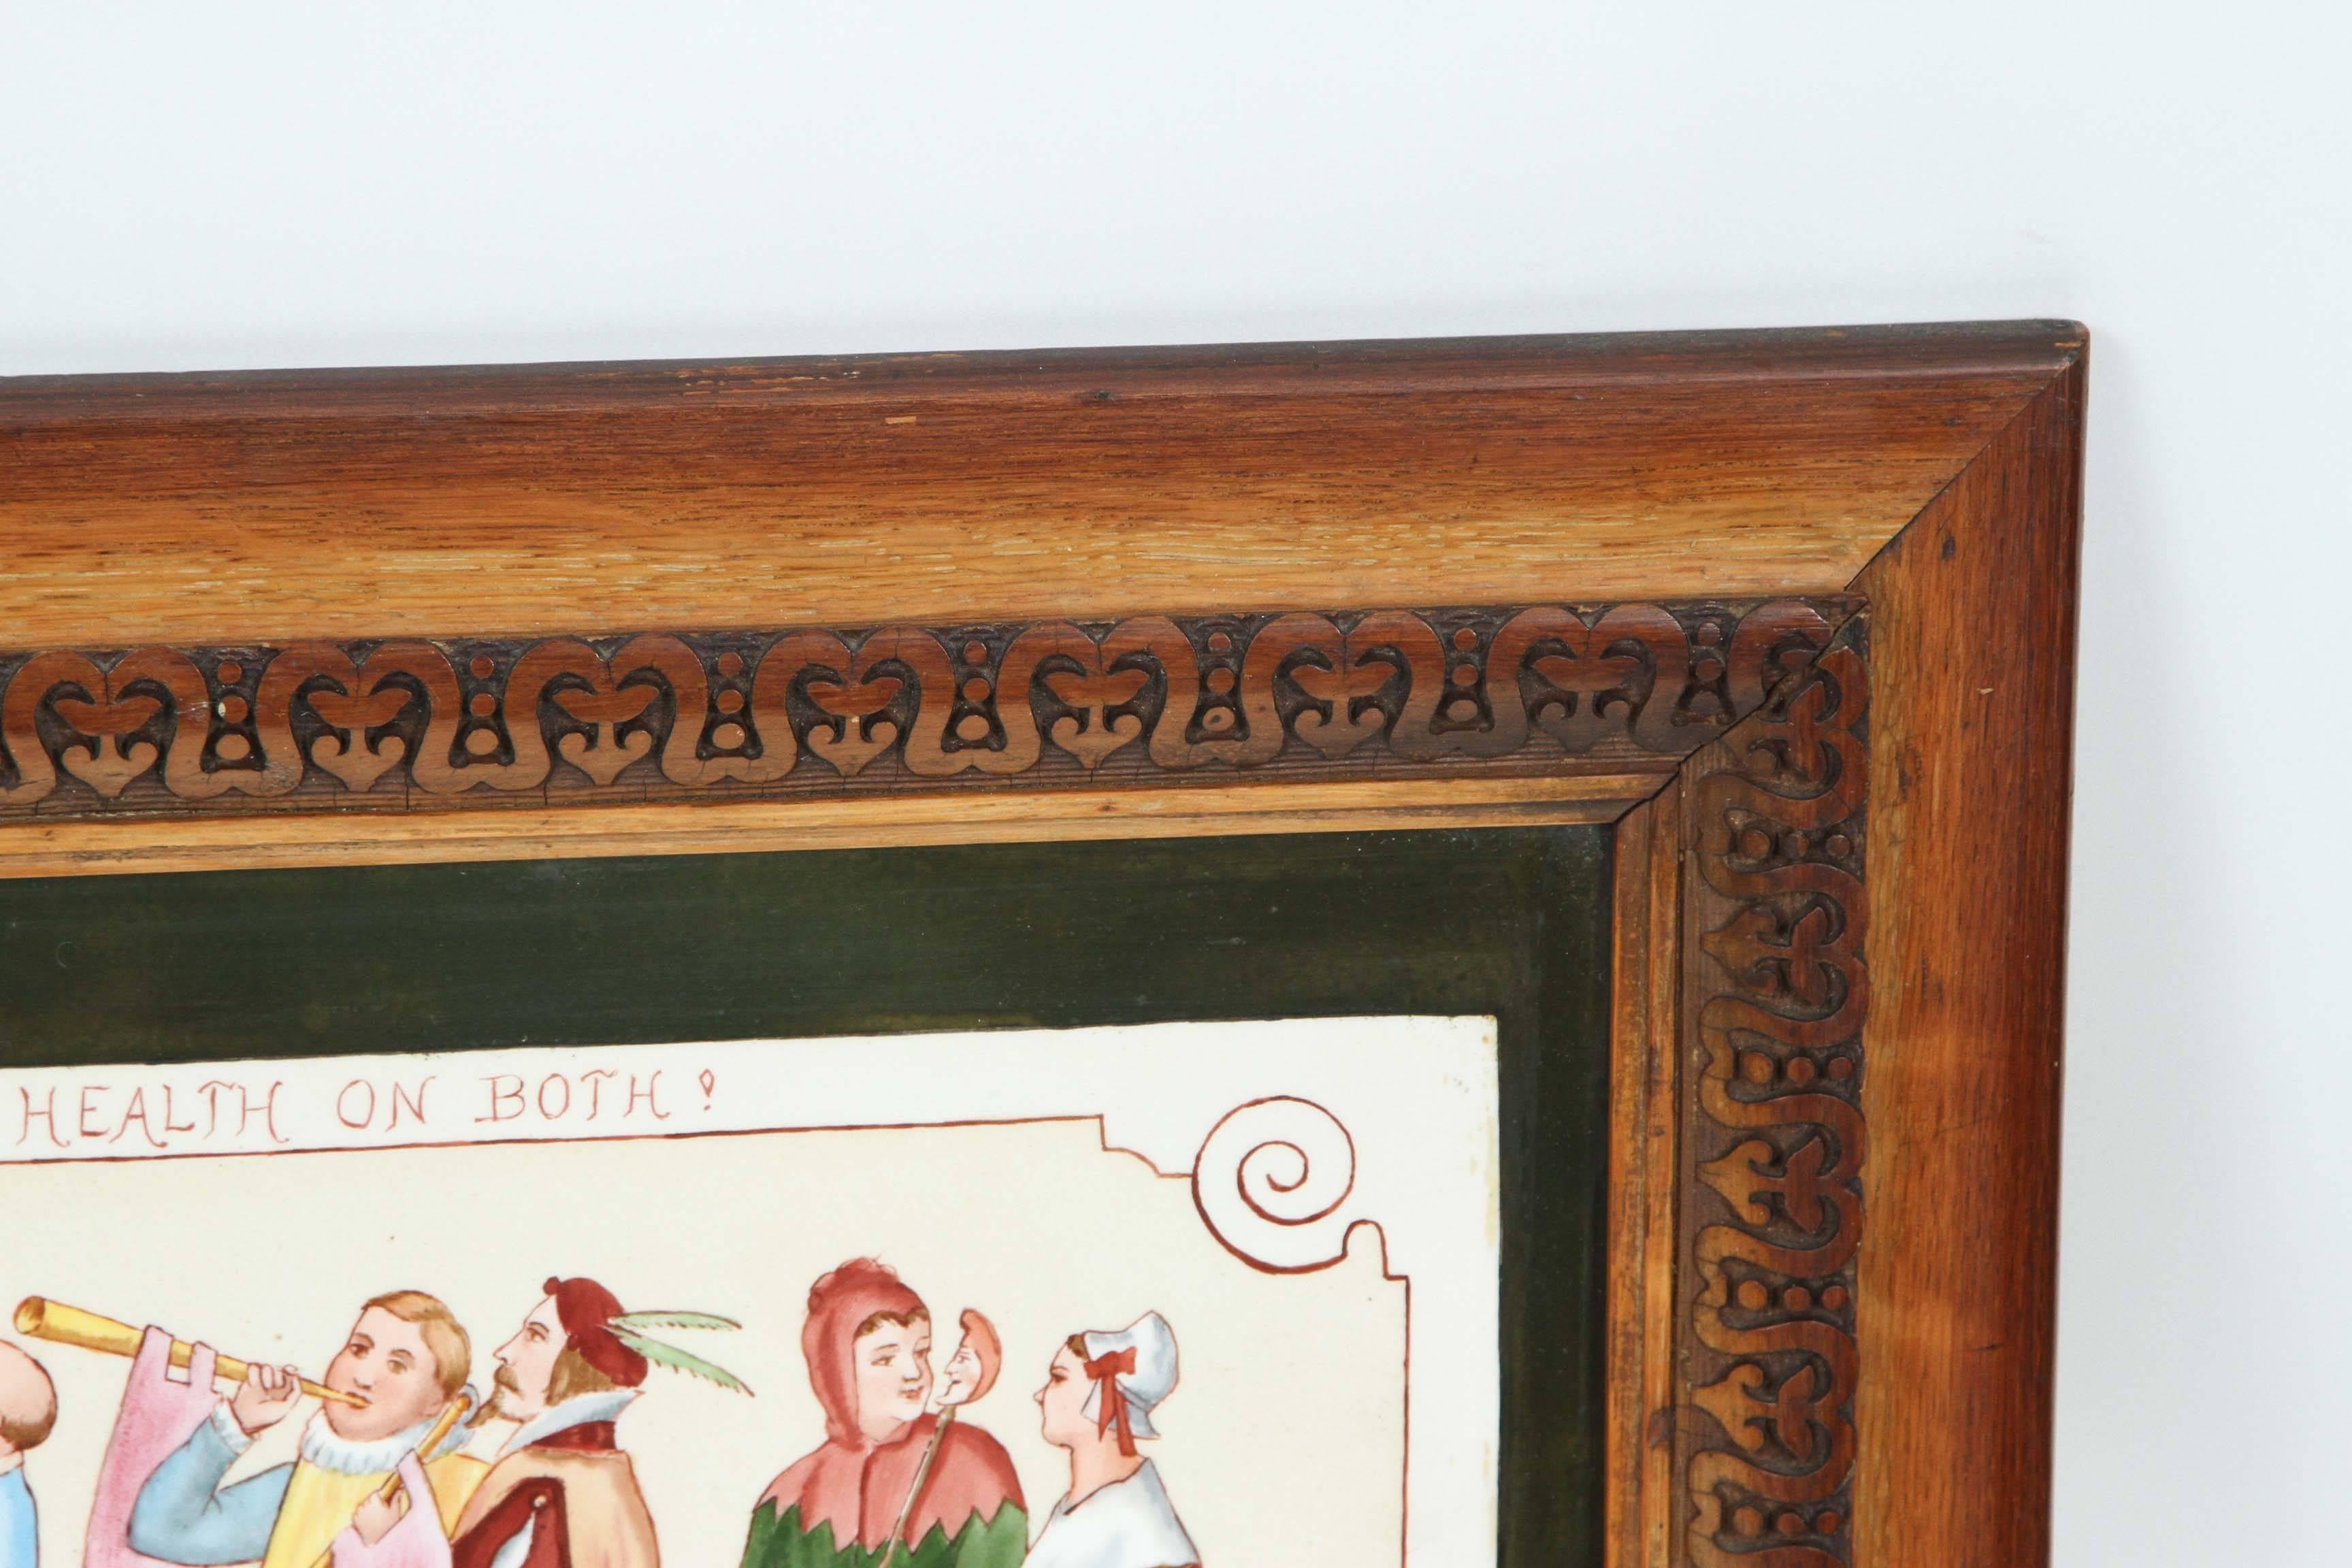 Vintage tile painting with carved wood frame inspired by Shakespeare's Macbeth. 

Quote reads:
